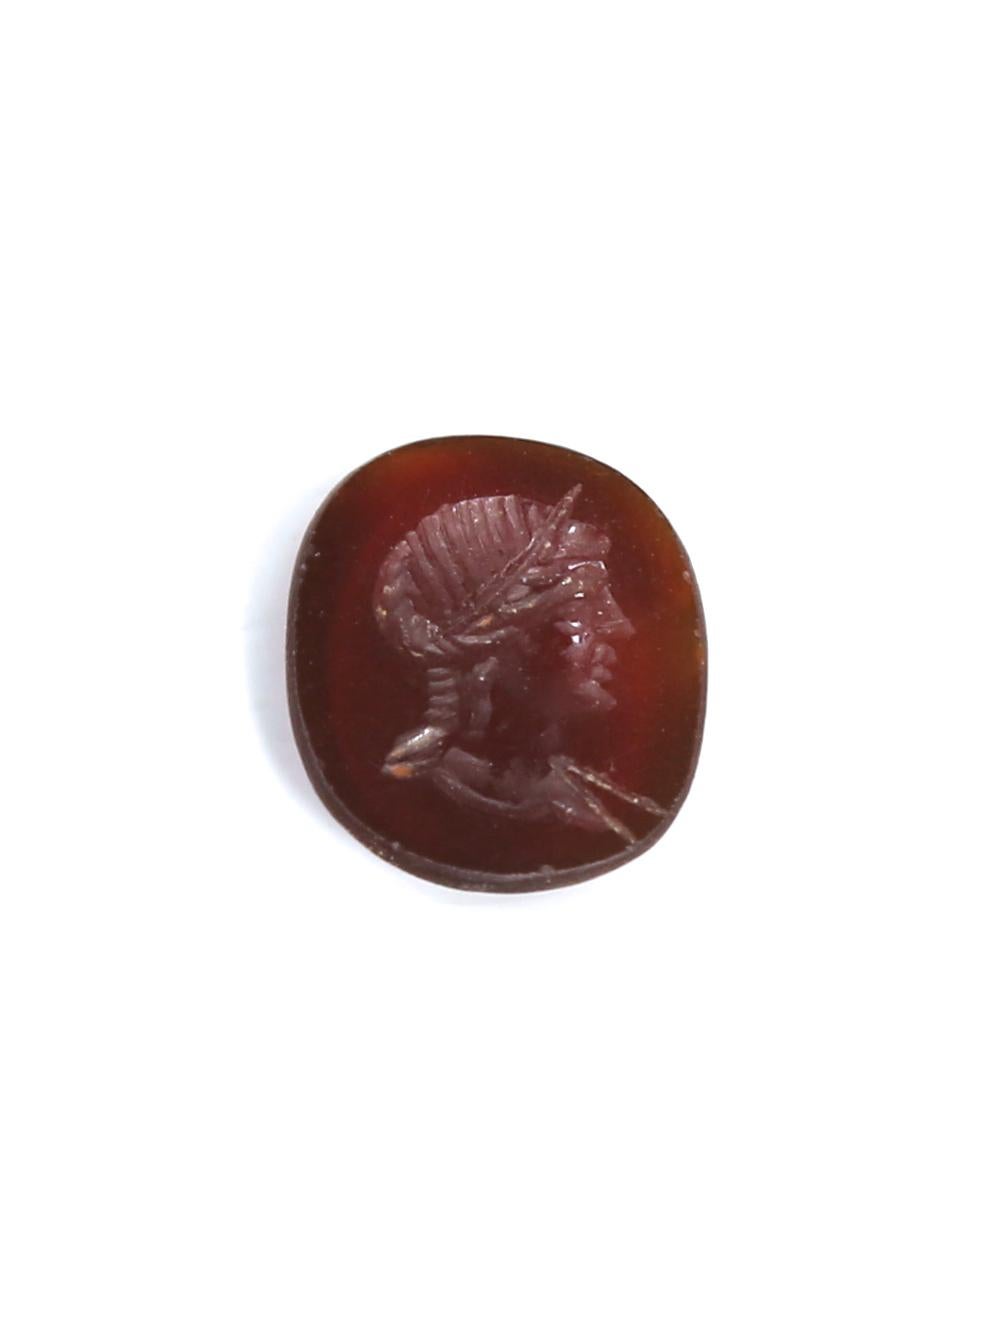 Ancient Roman Carnelian Intaglio. An intaglio is defined as a small Gemstone, generally semi-precious, that has been carved with images or inscriptions only on the face. This style of carving is the opposite of the cameo technique. The engraving of